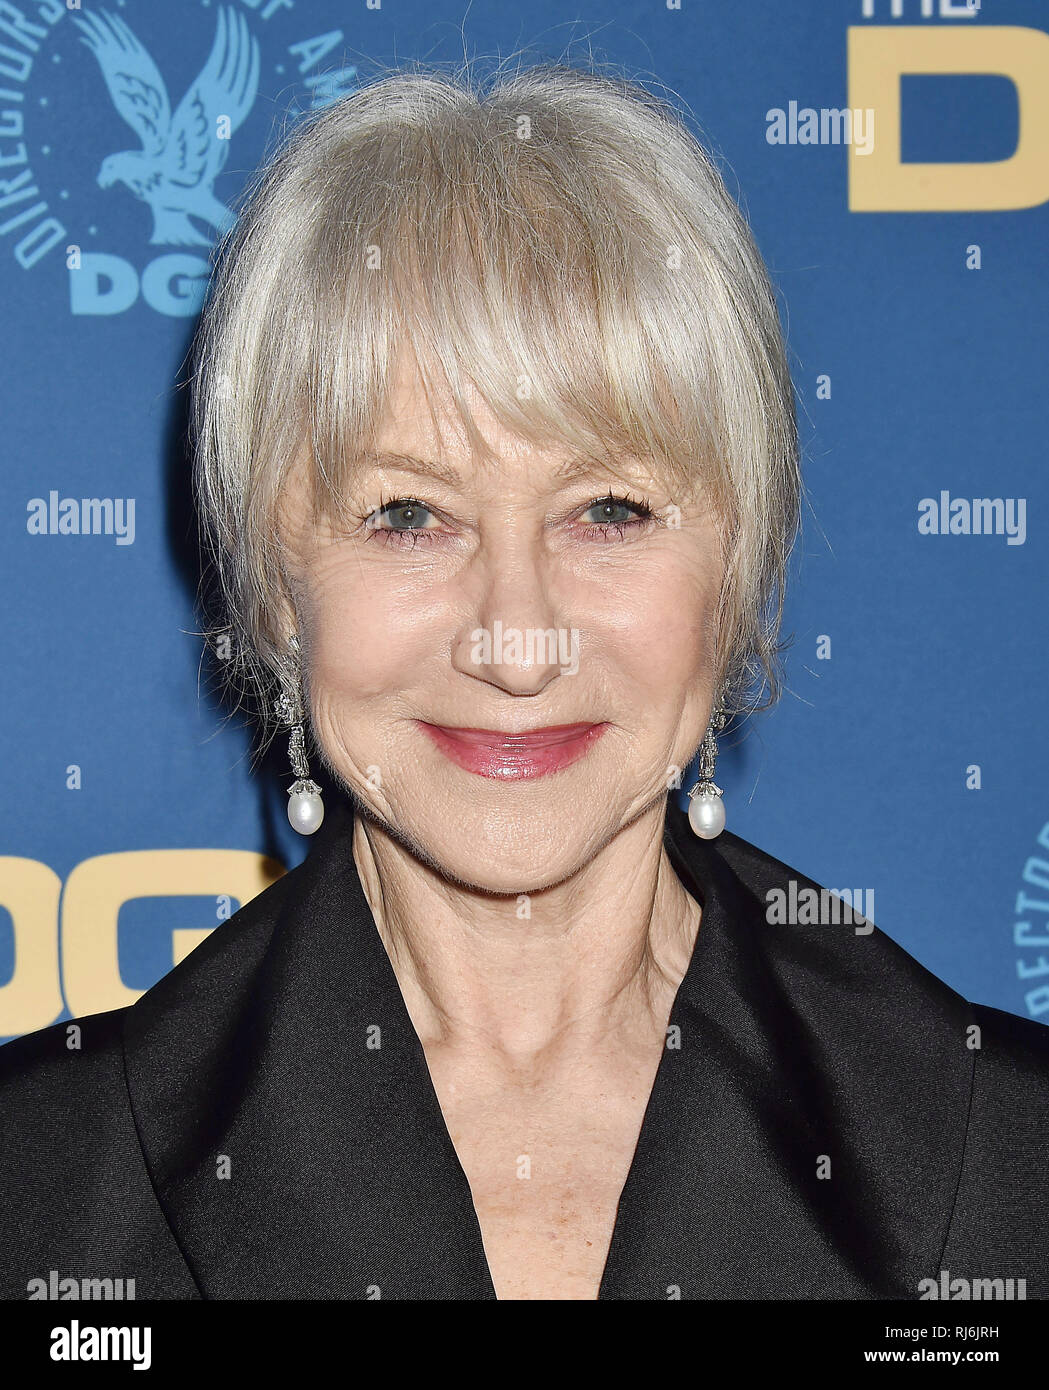 HELEN MIRREN English film and stage actress at  the 71st Annual Directors Guild Of America Awards at The Ray Dolby Ballroom at Hollywood & Highland Center on February 02, 2019 in Hollywood, California. Photo: Jeffrey Mayer Stock Photo